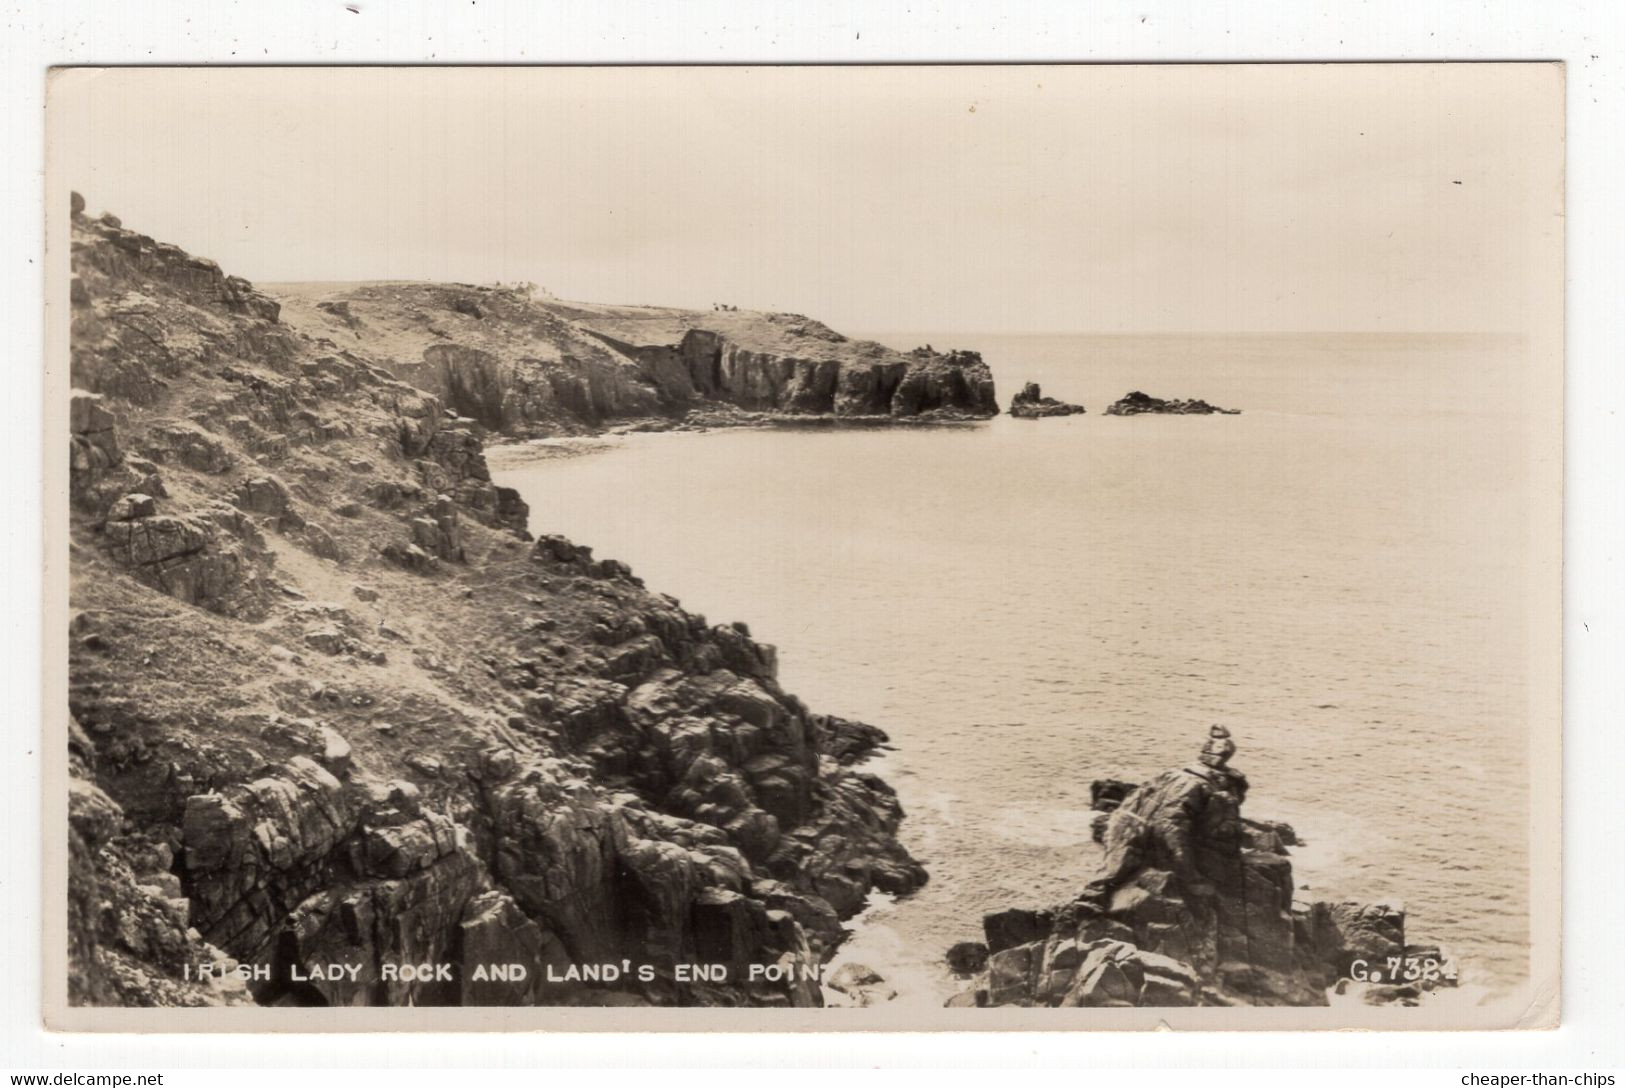 Irish Lady Rock And Land'd End Point - Valentine G. 7324 - Land's End